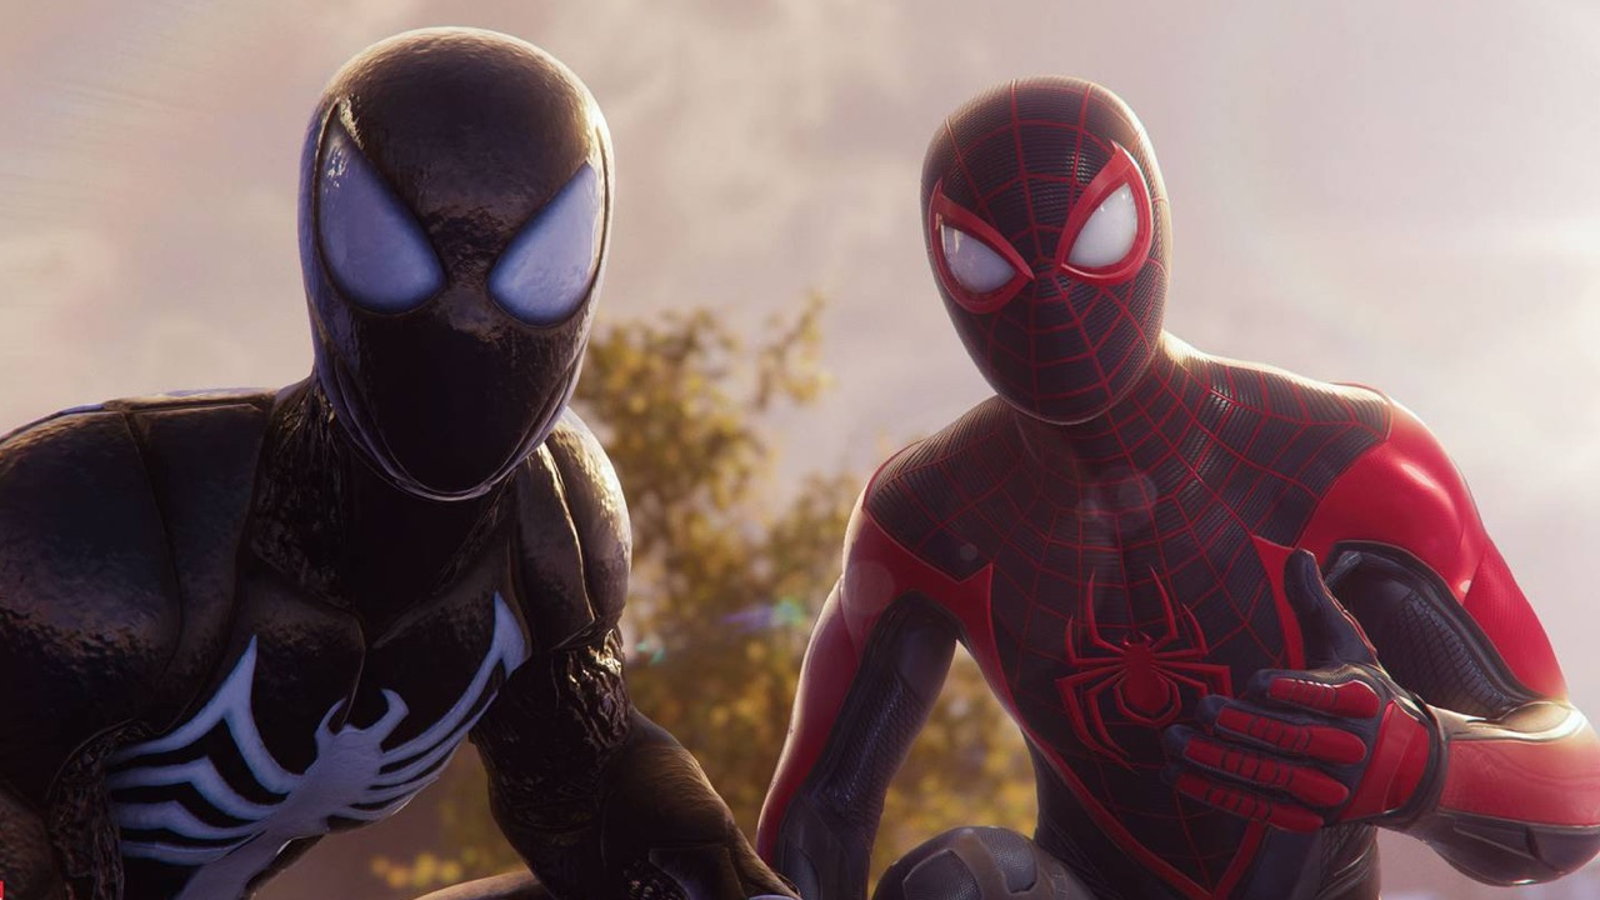 Spider-Man PS4 New Game Plus Mode Announced